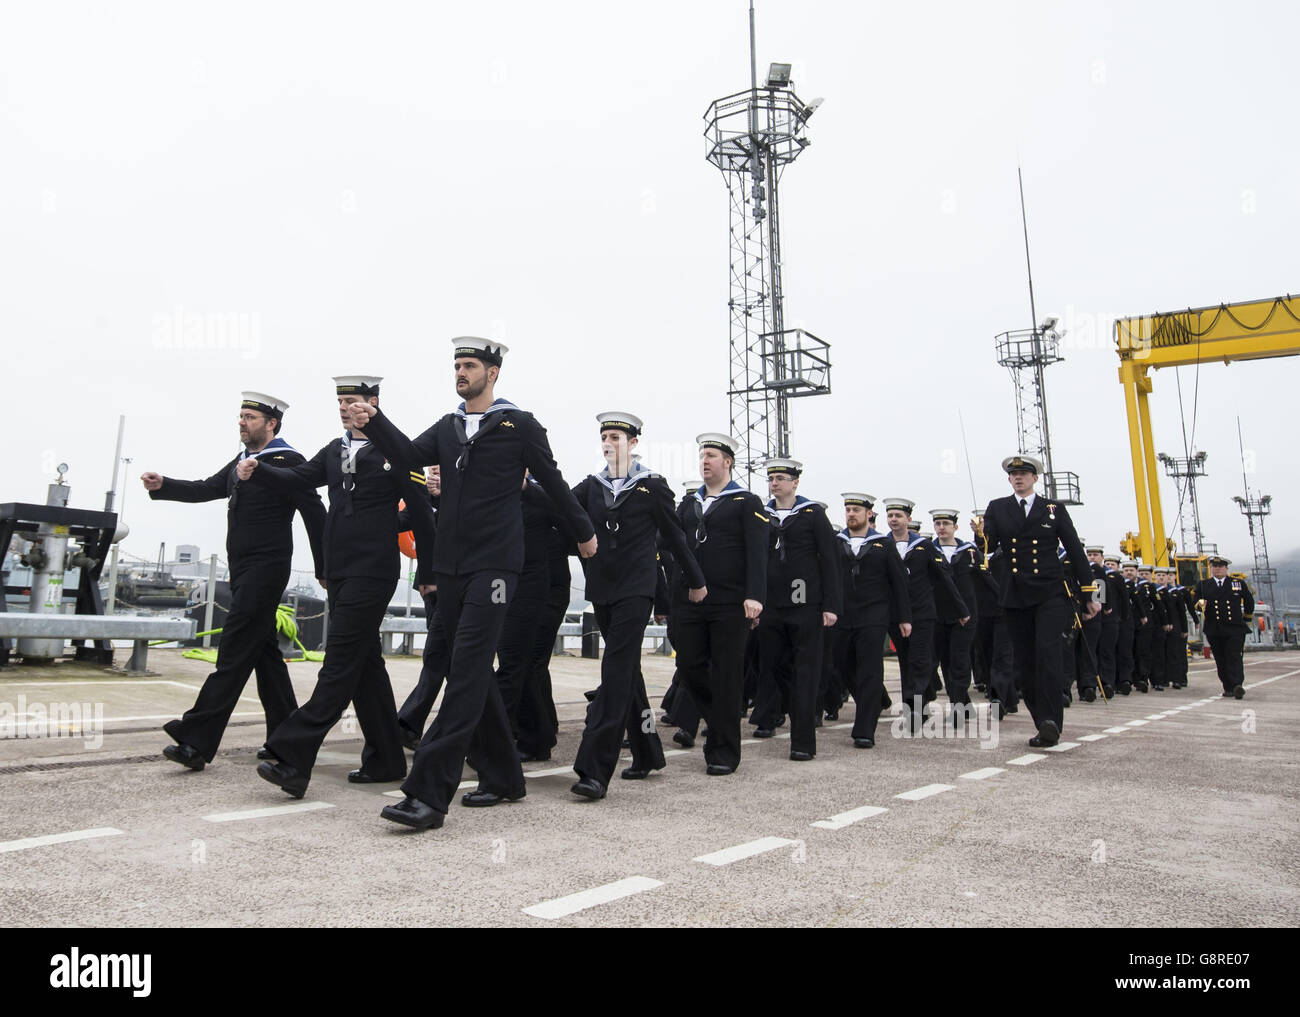 Submariners during the commissioning ceremony at Faslane naval base on the Clyde when the 7,400-tonne nuclear-powered submarine HMS Artful officially joined the Royal Navy fleet. Stock Photo